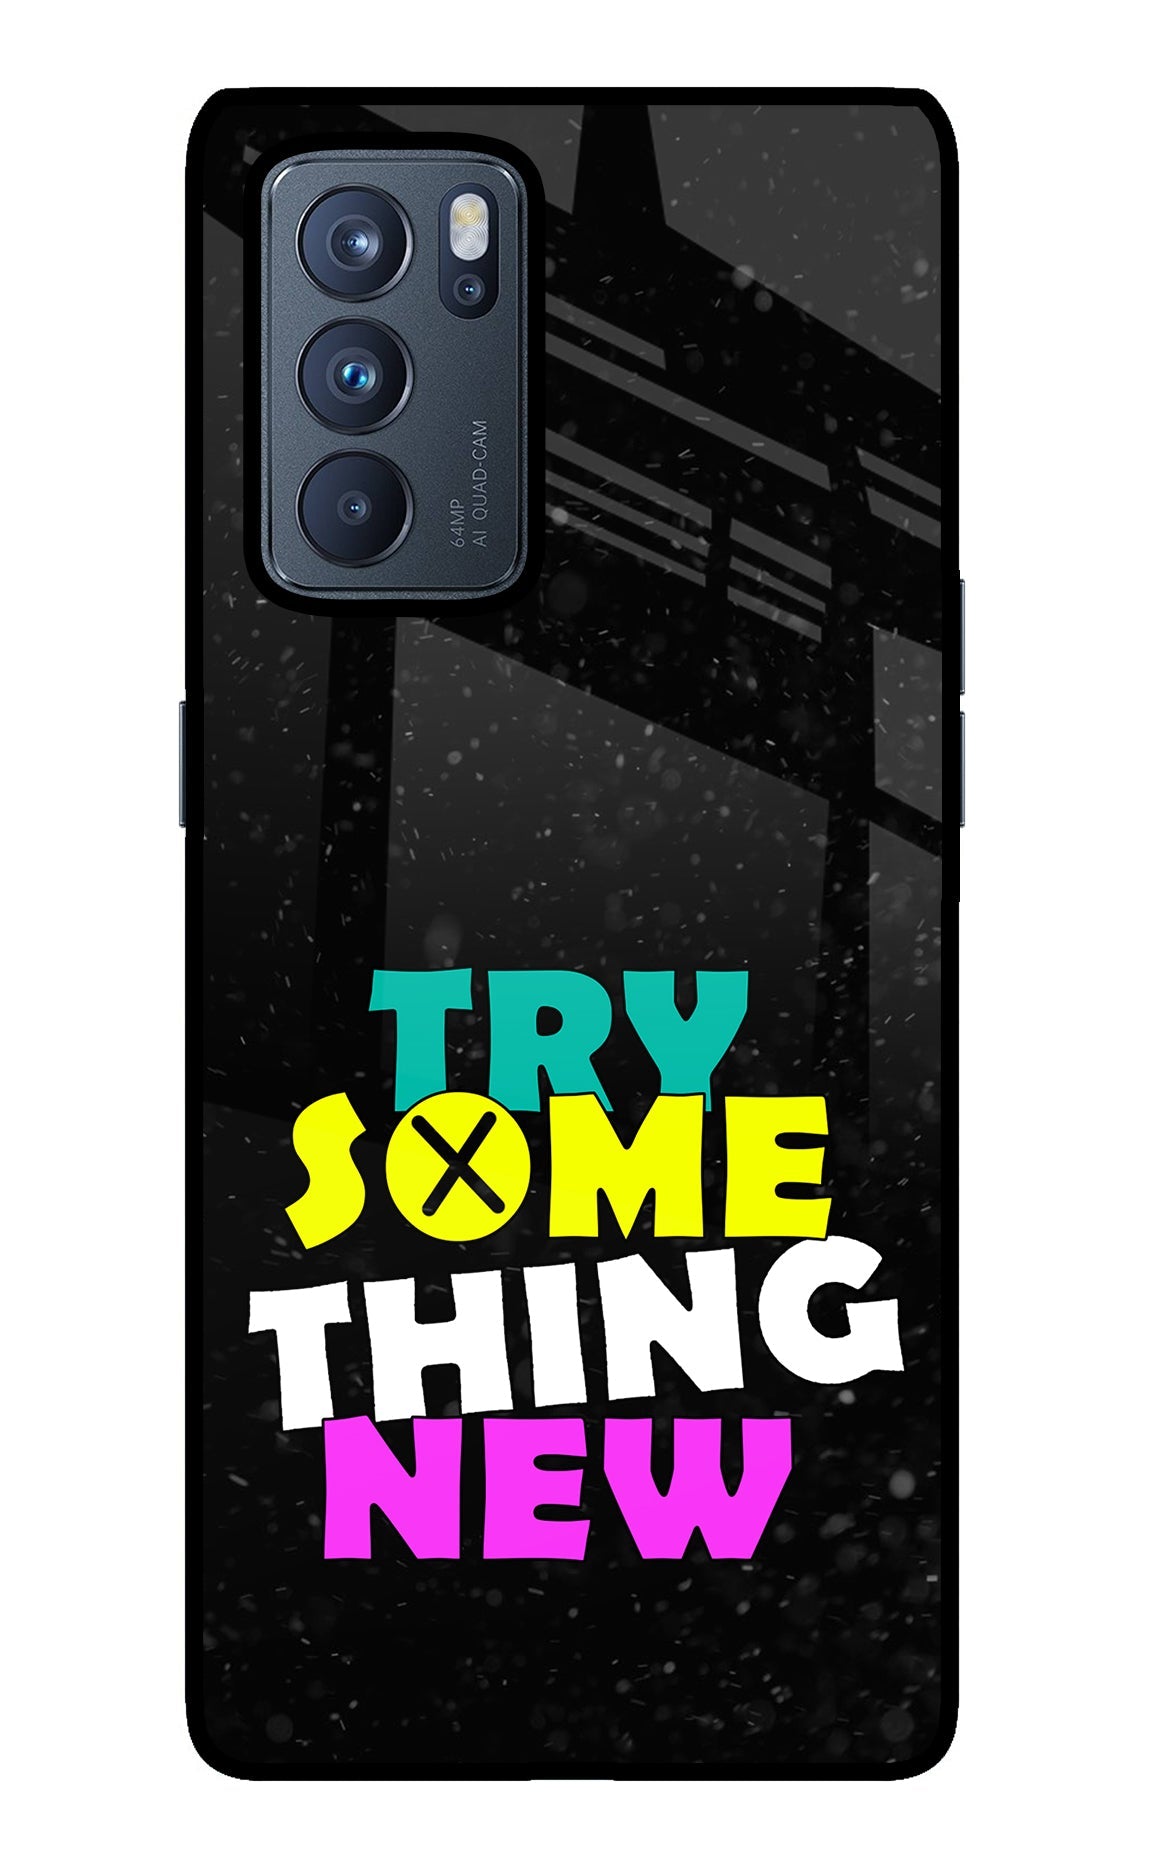 Try Something New Oppo Reno6 Pro 5G Back Cover